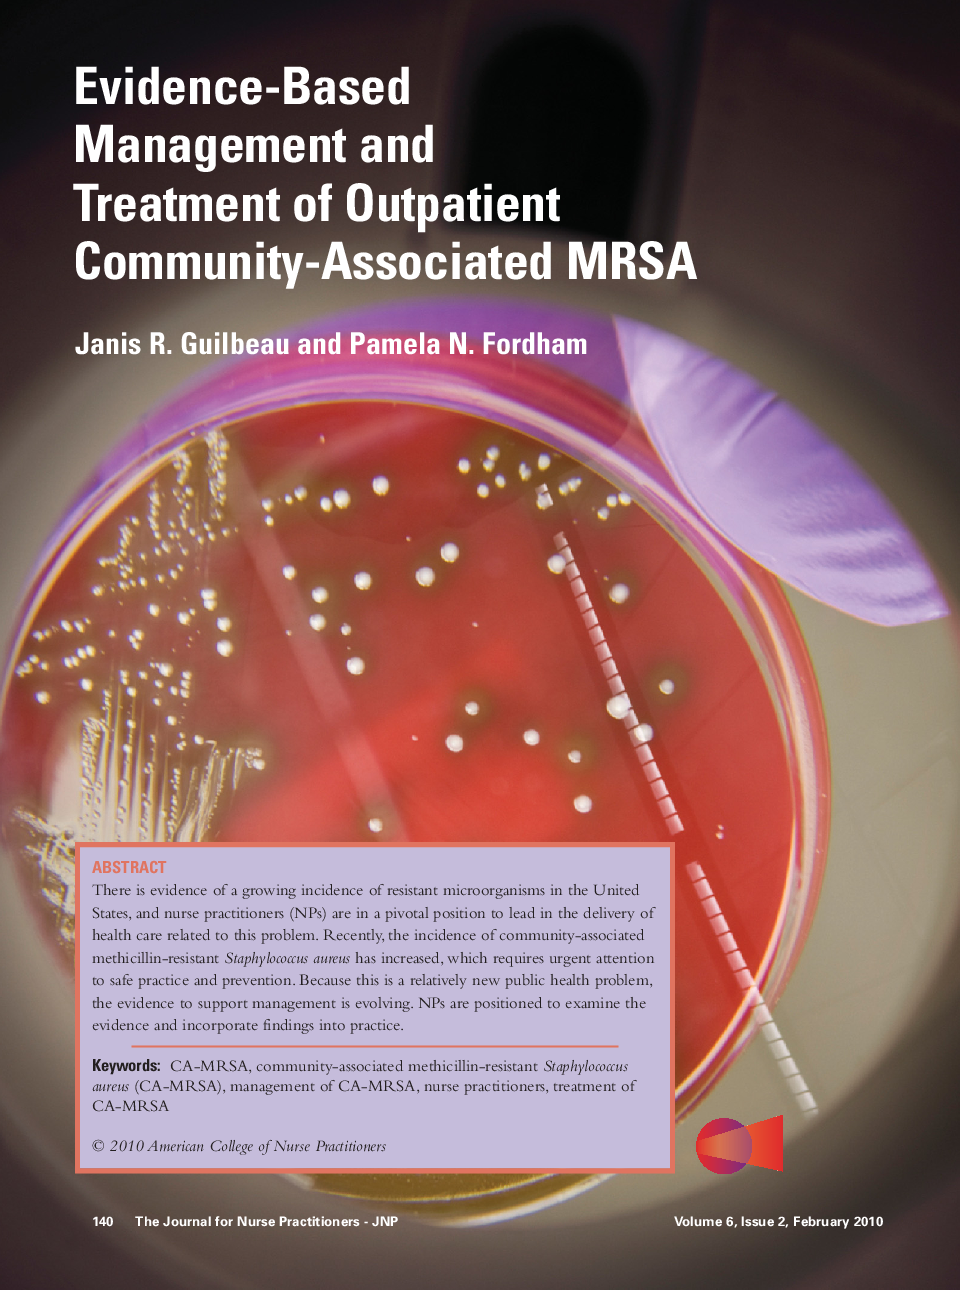 Evidence-Based Management and Treatment of Outpatient Community-Associated MRSA 